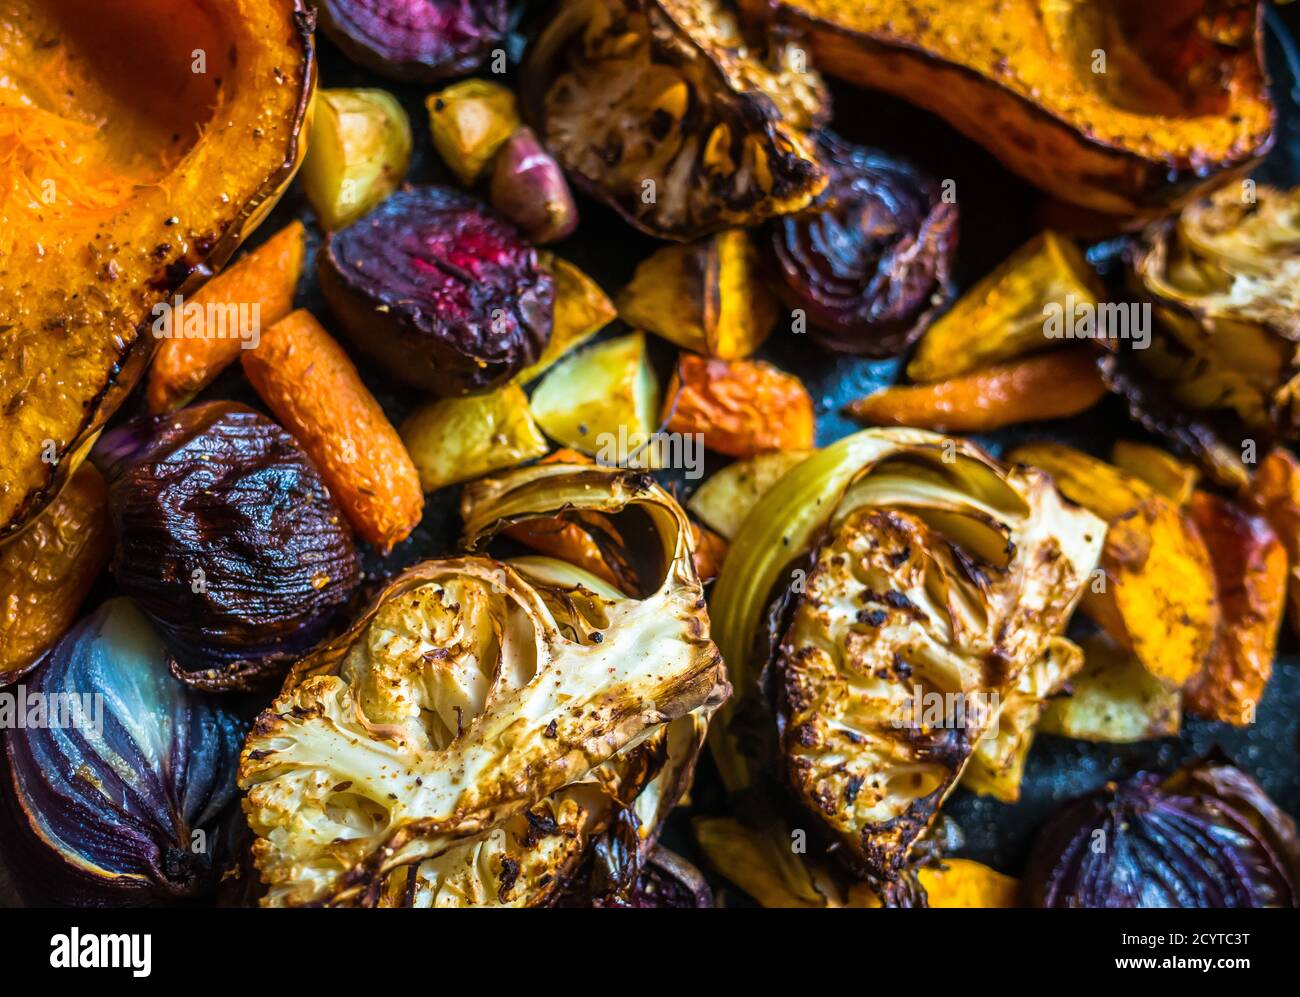 A selection of Autumnal roasted vegetables. Stock Photo